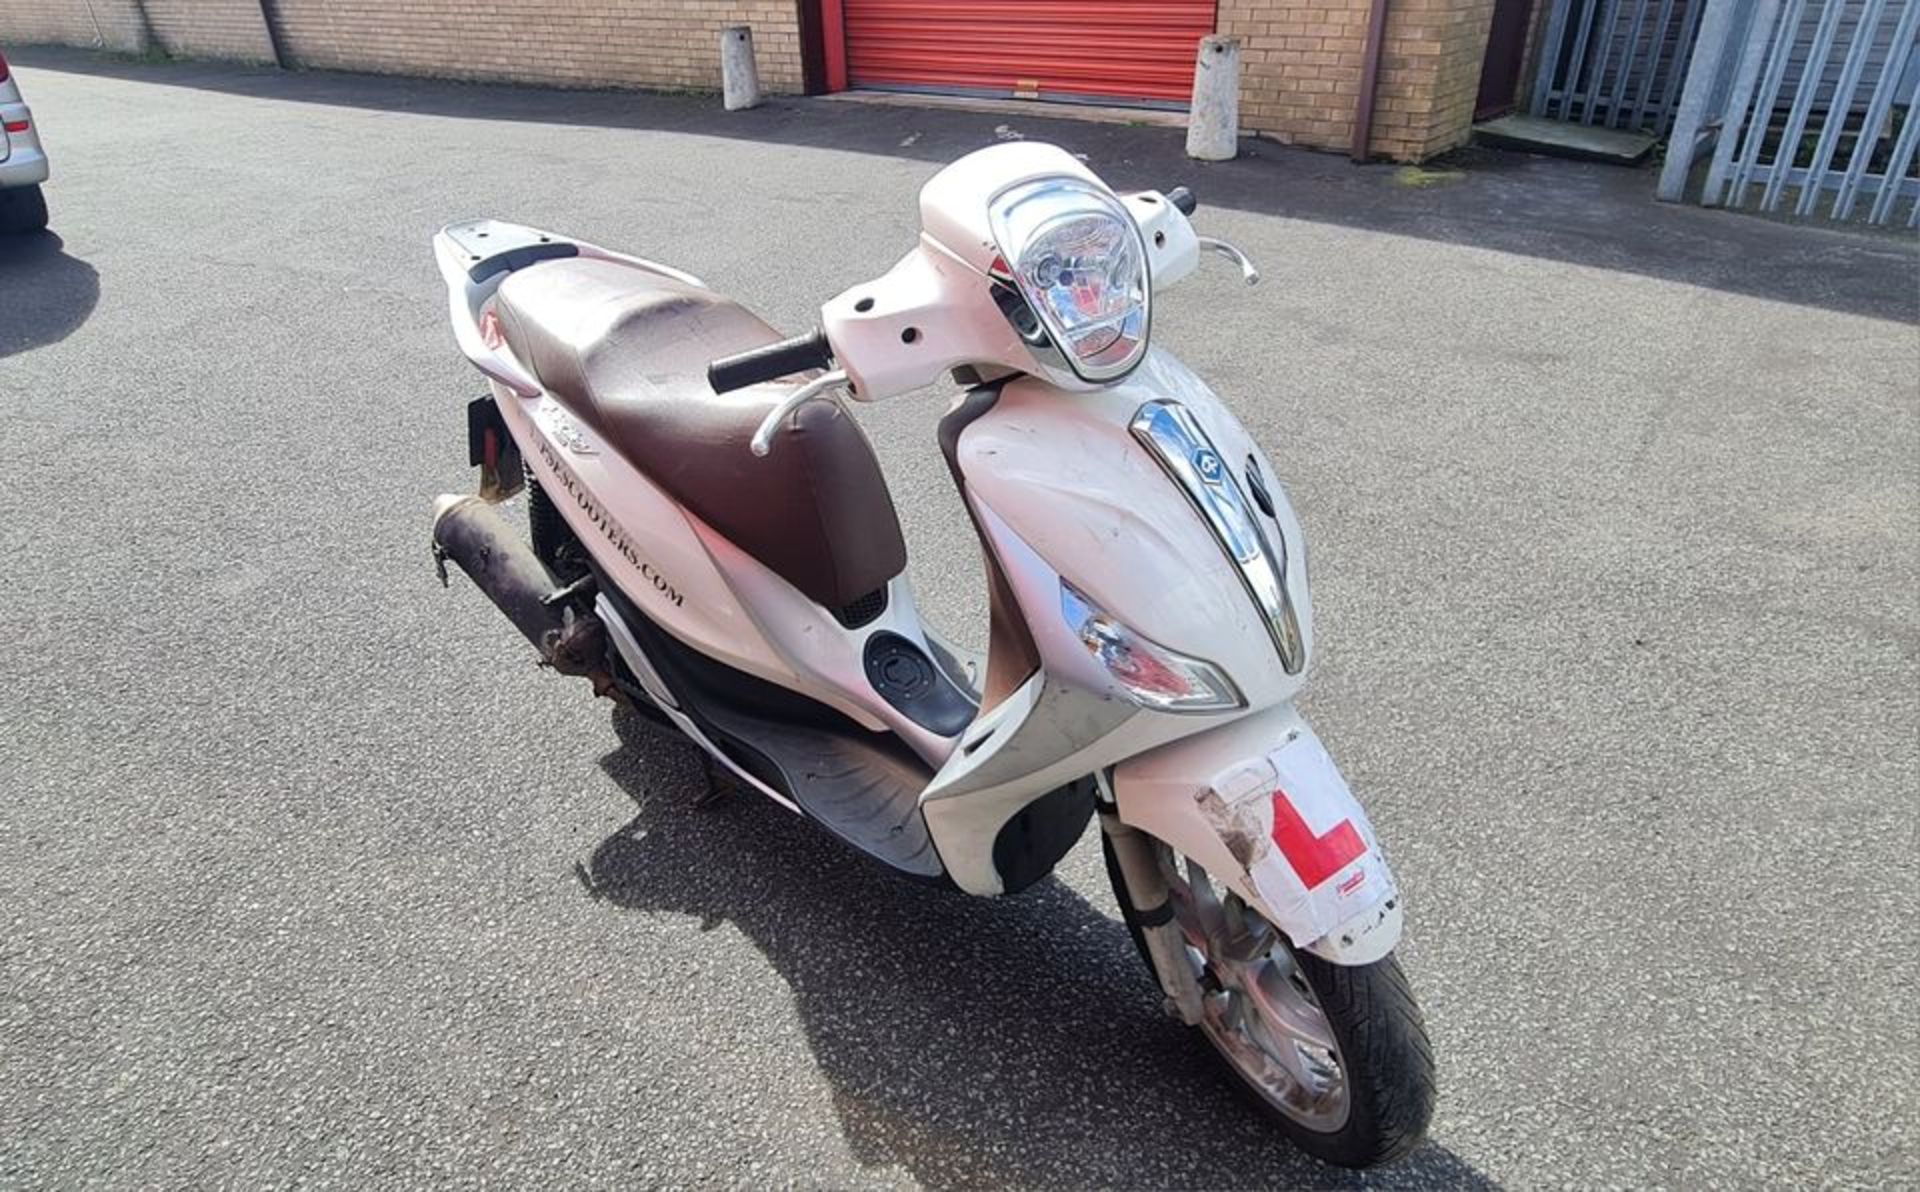 2016 Piaggio Medley 125 Scooter - Missing Key - Image 13 of 13